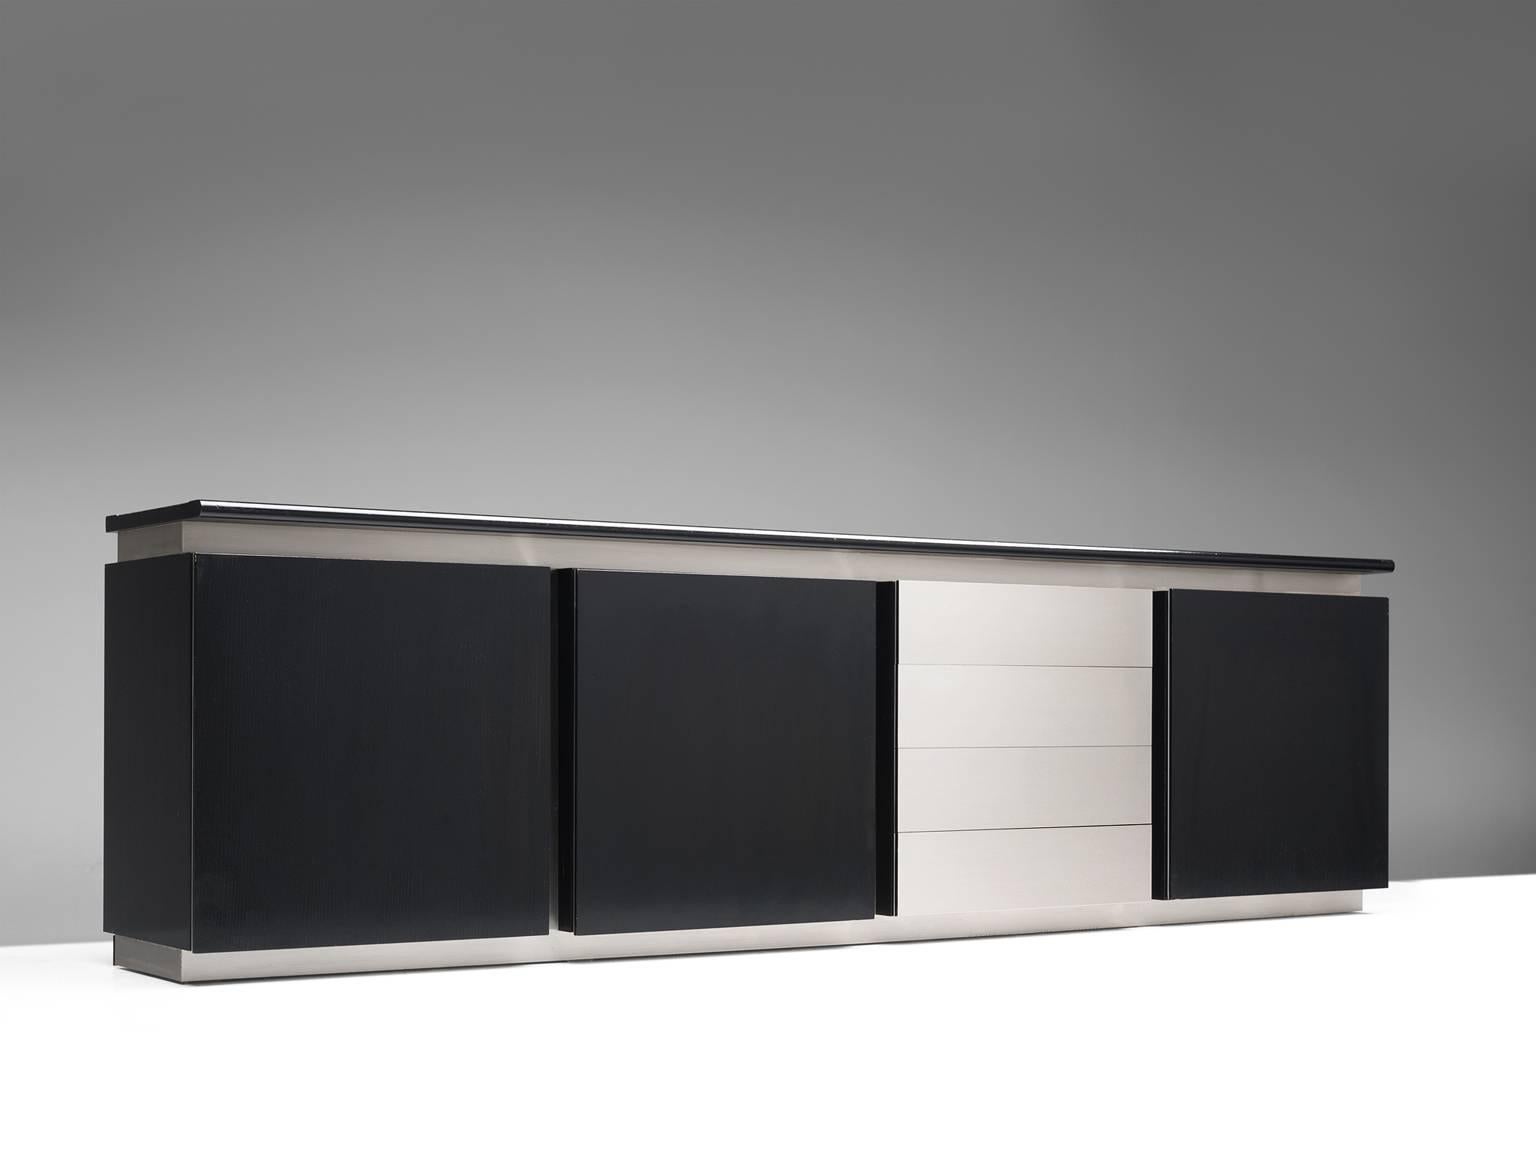 Credenza, oak and steel, 1970s, Italy.

Sleek and modern credenza in stainless steel and stained oak. This cabinet has both a contemporary yet monumental appearance. The design is simplistic and straight. The vertical lines alternate with